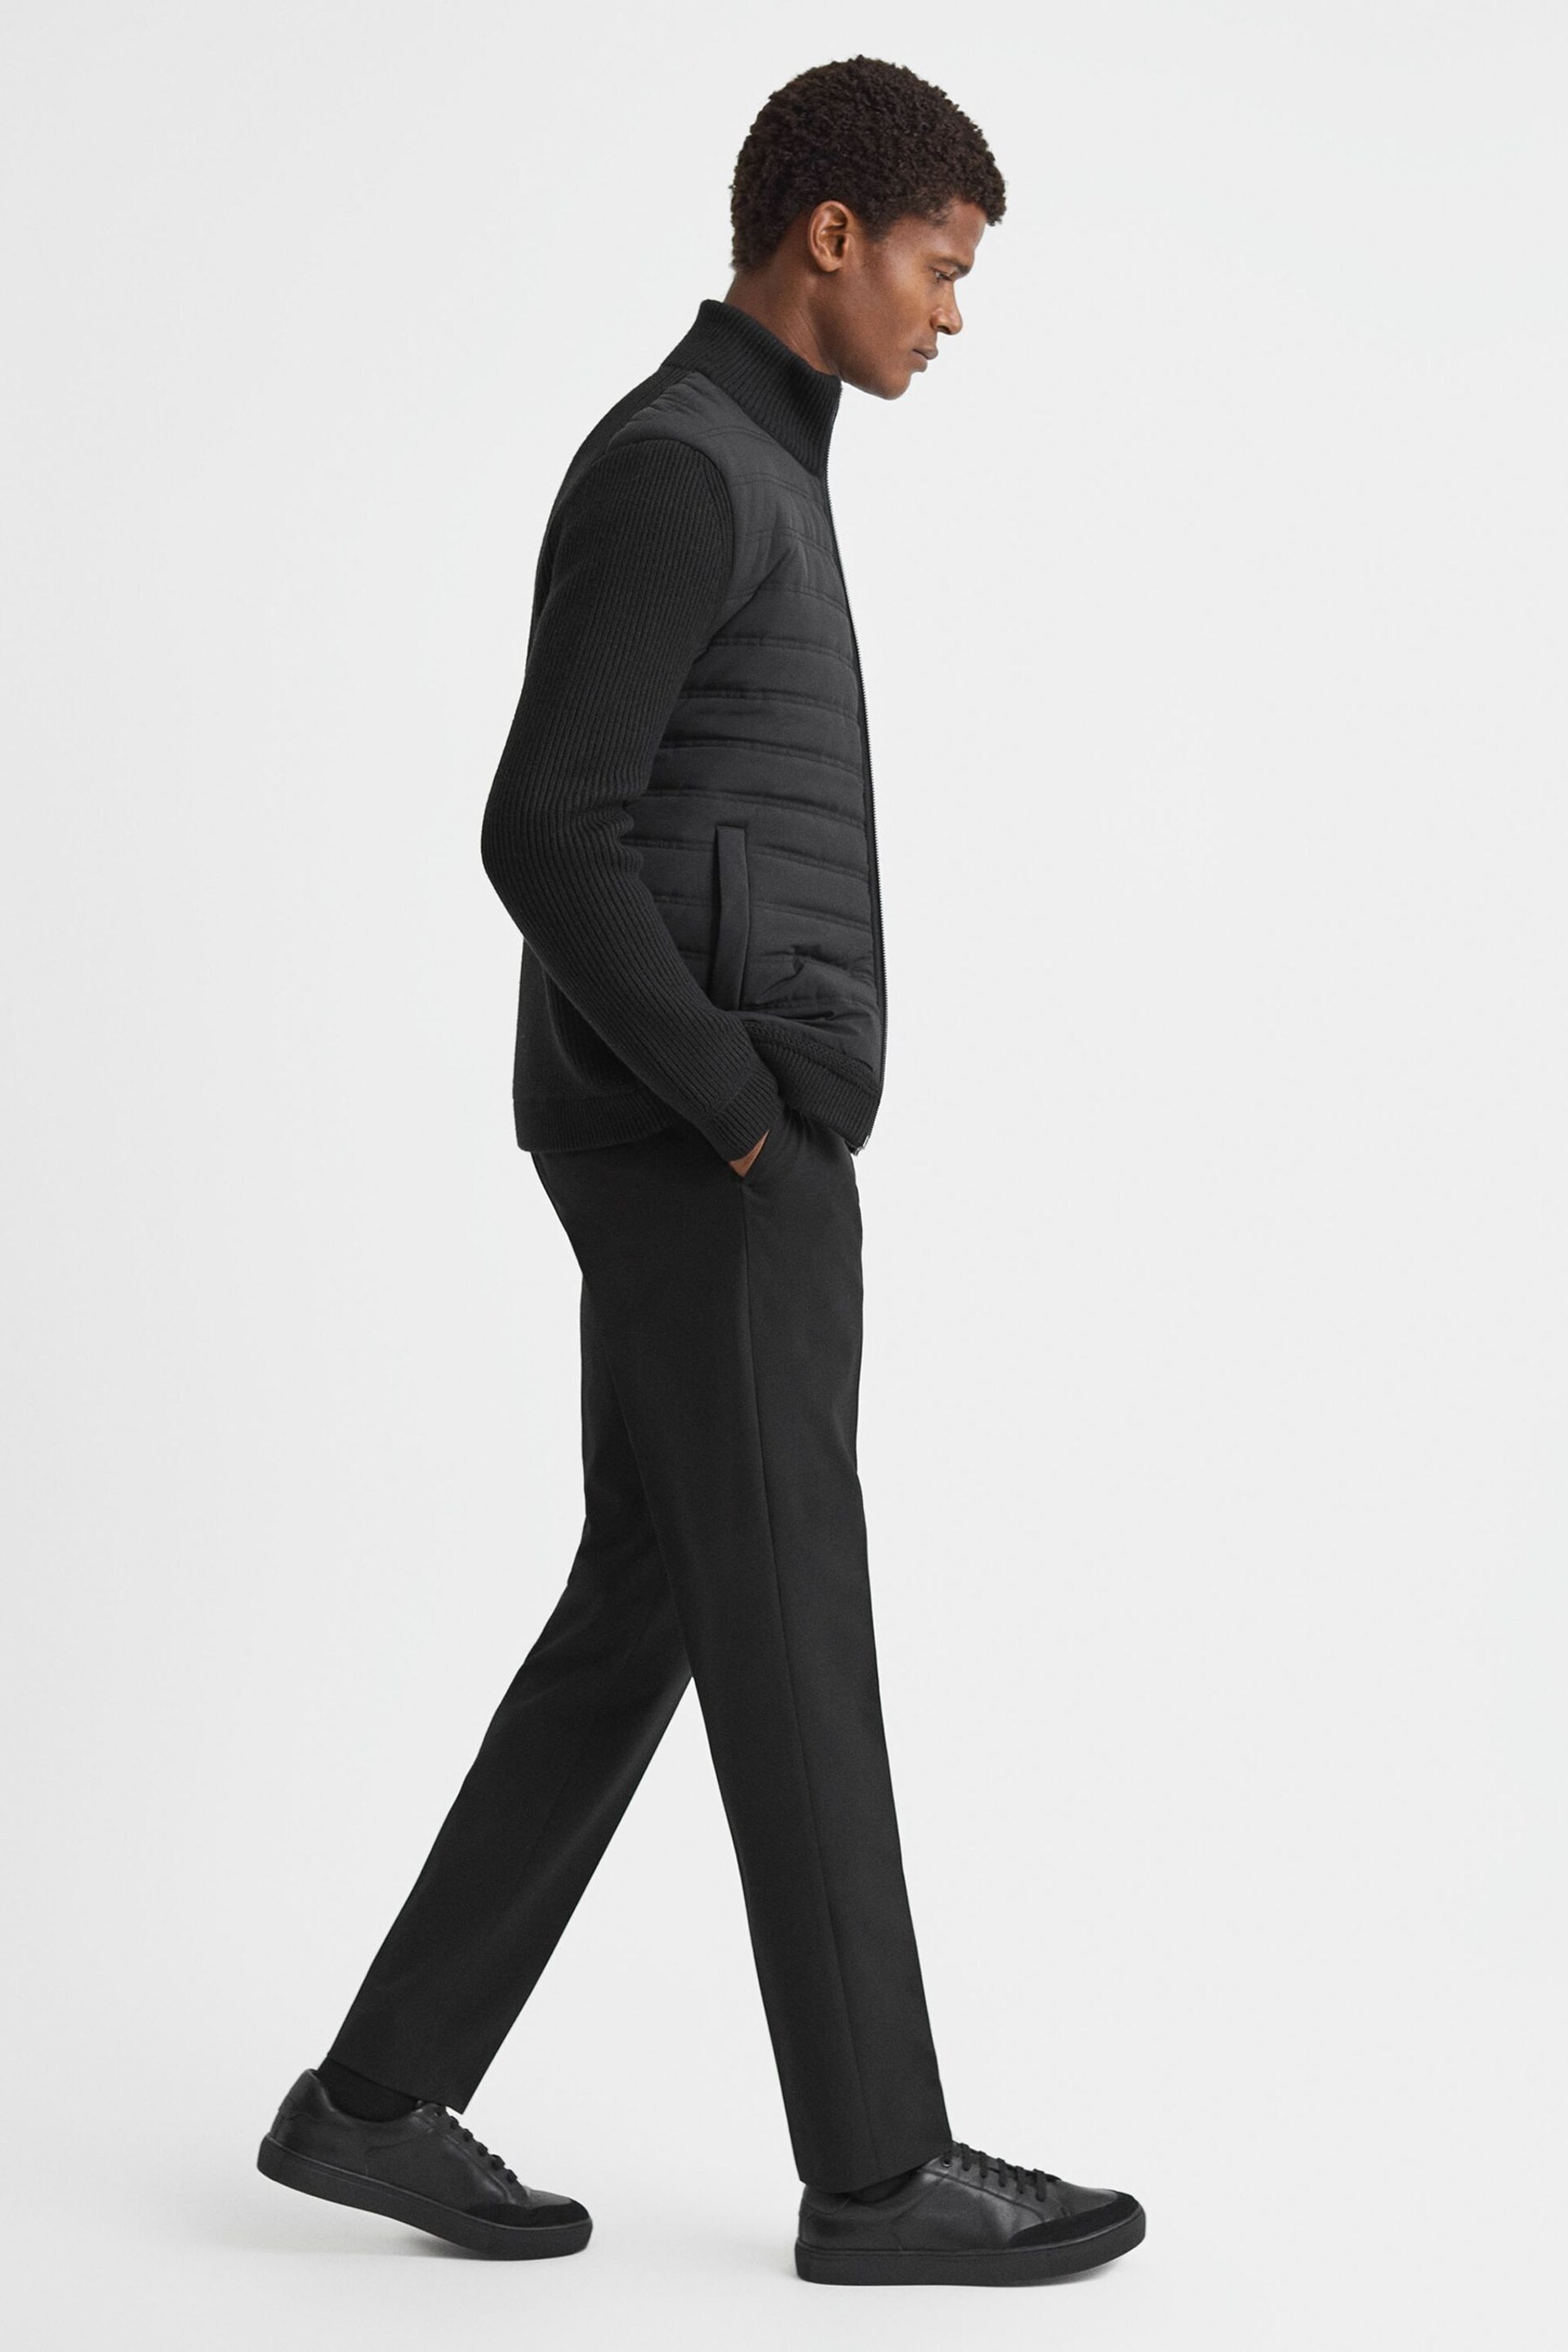 Reiss Black Southend Hybrid Quilt and Knit Zip-Through Jacket - Image 1 of 8